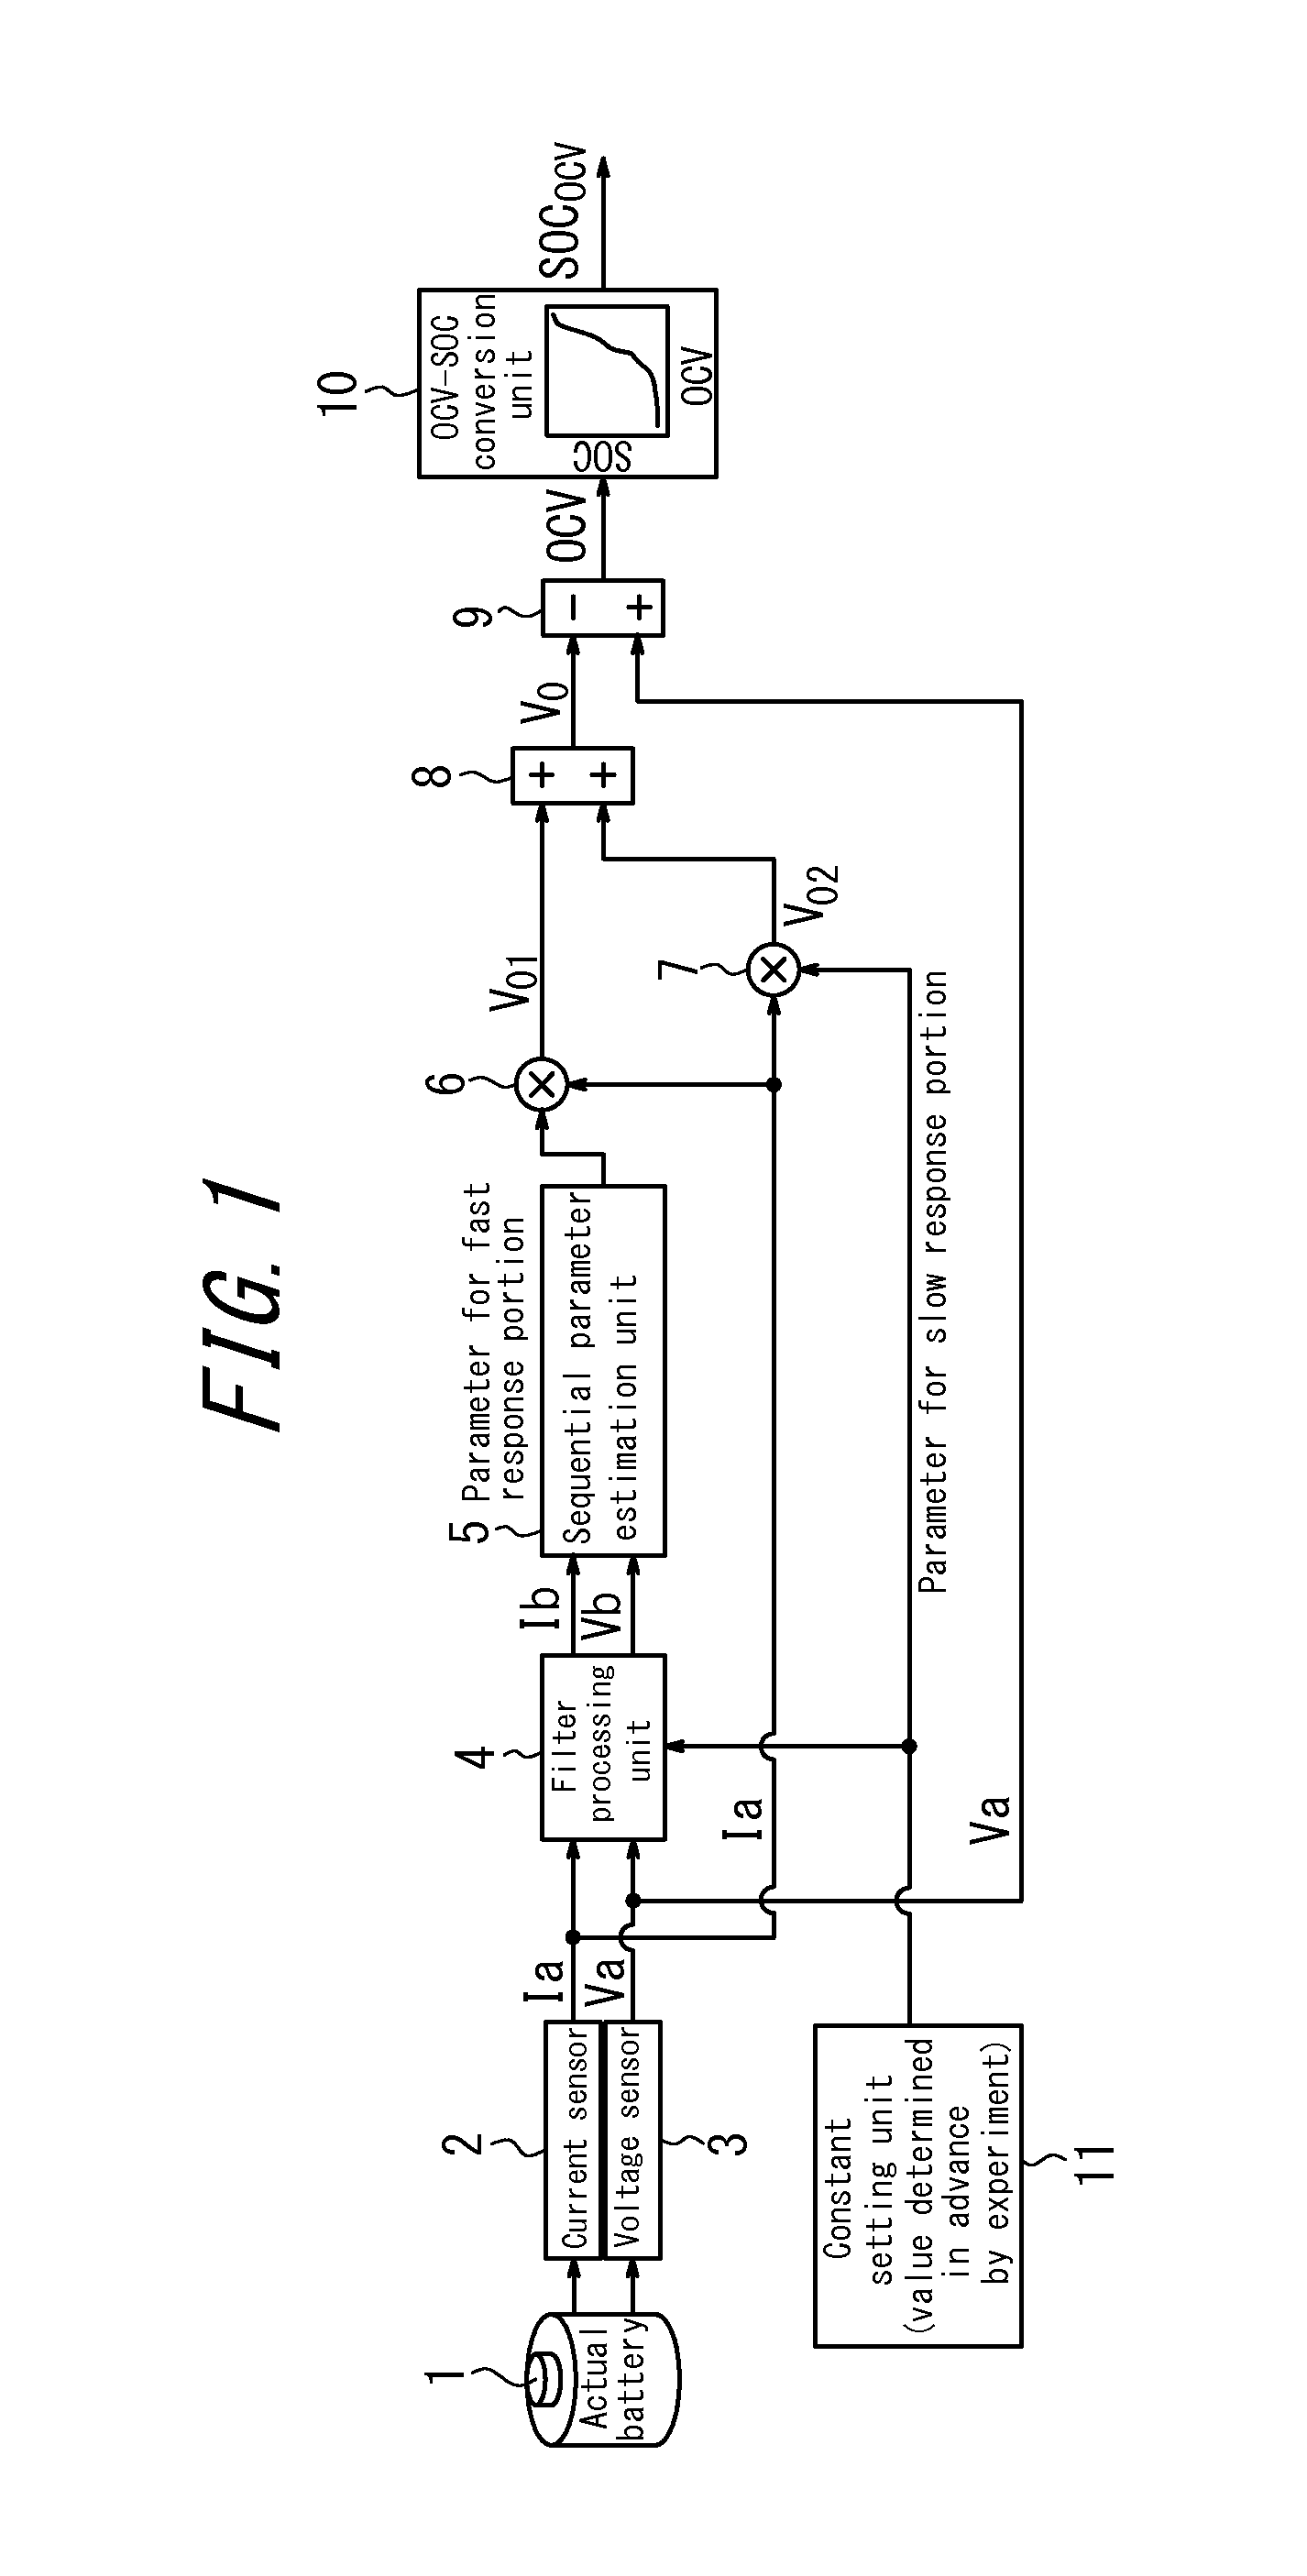 Apparatus for battery state estimation